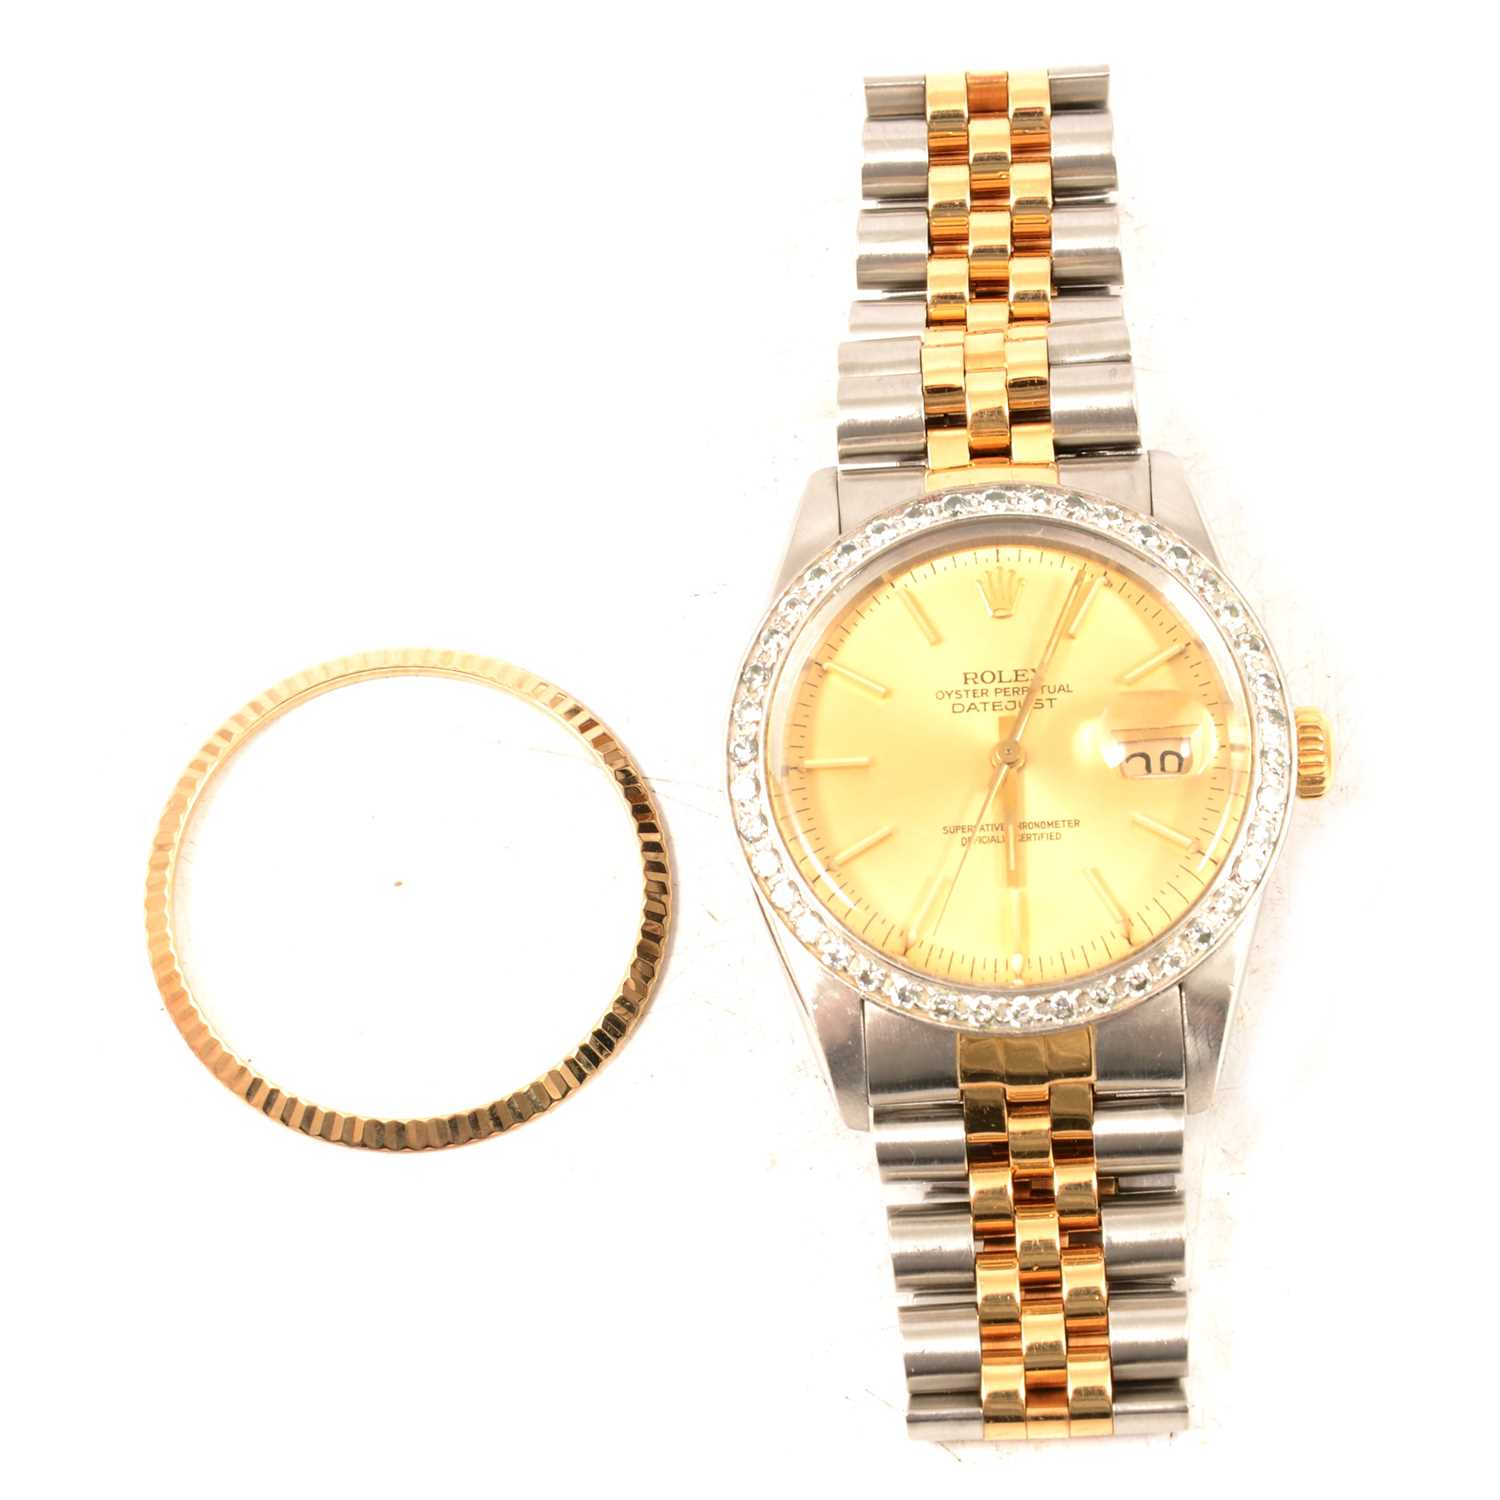 Rolex - a gentleman's/lady's Oyster Perpetual Datejust two tone wristwatch.